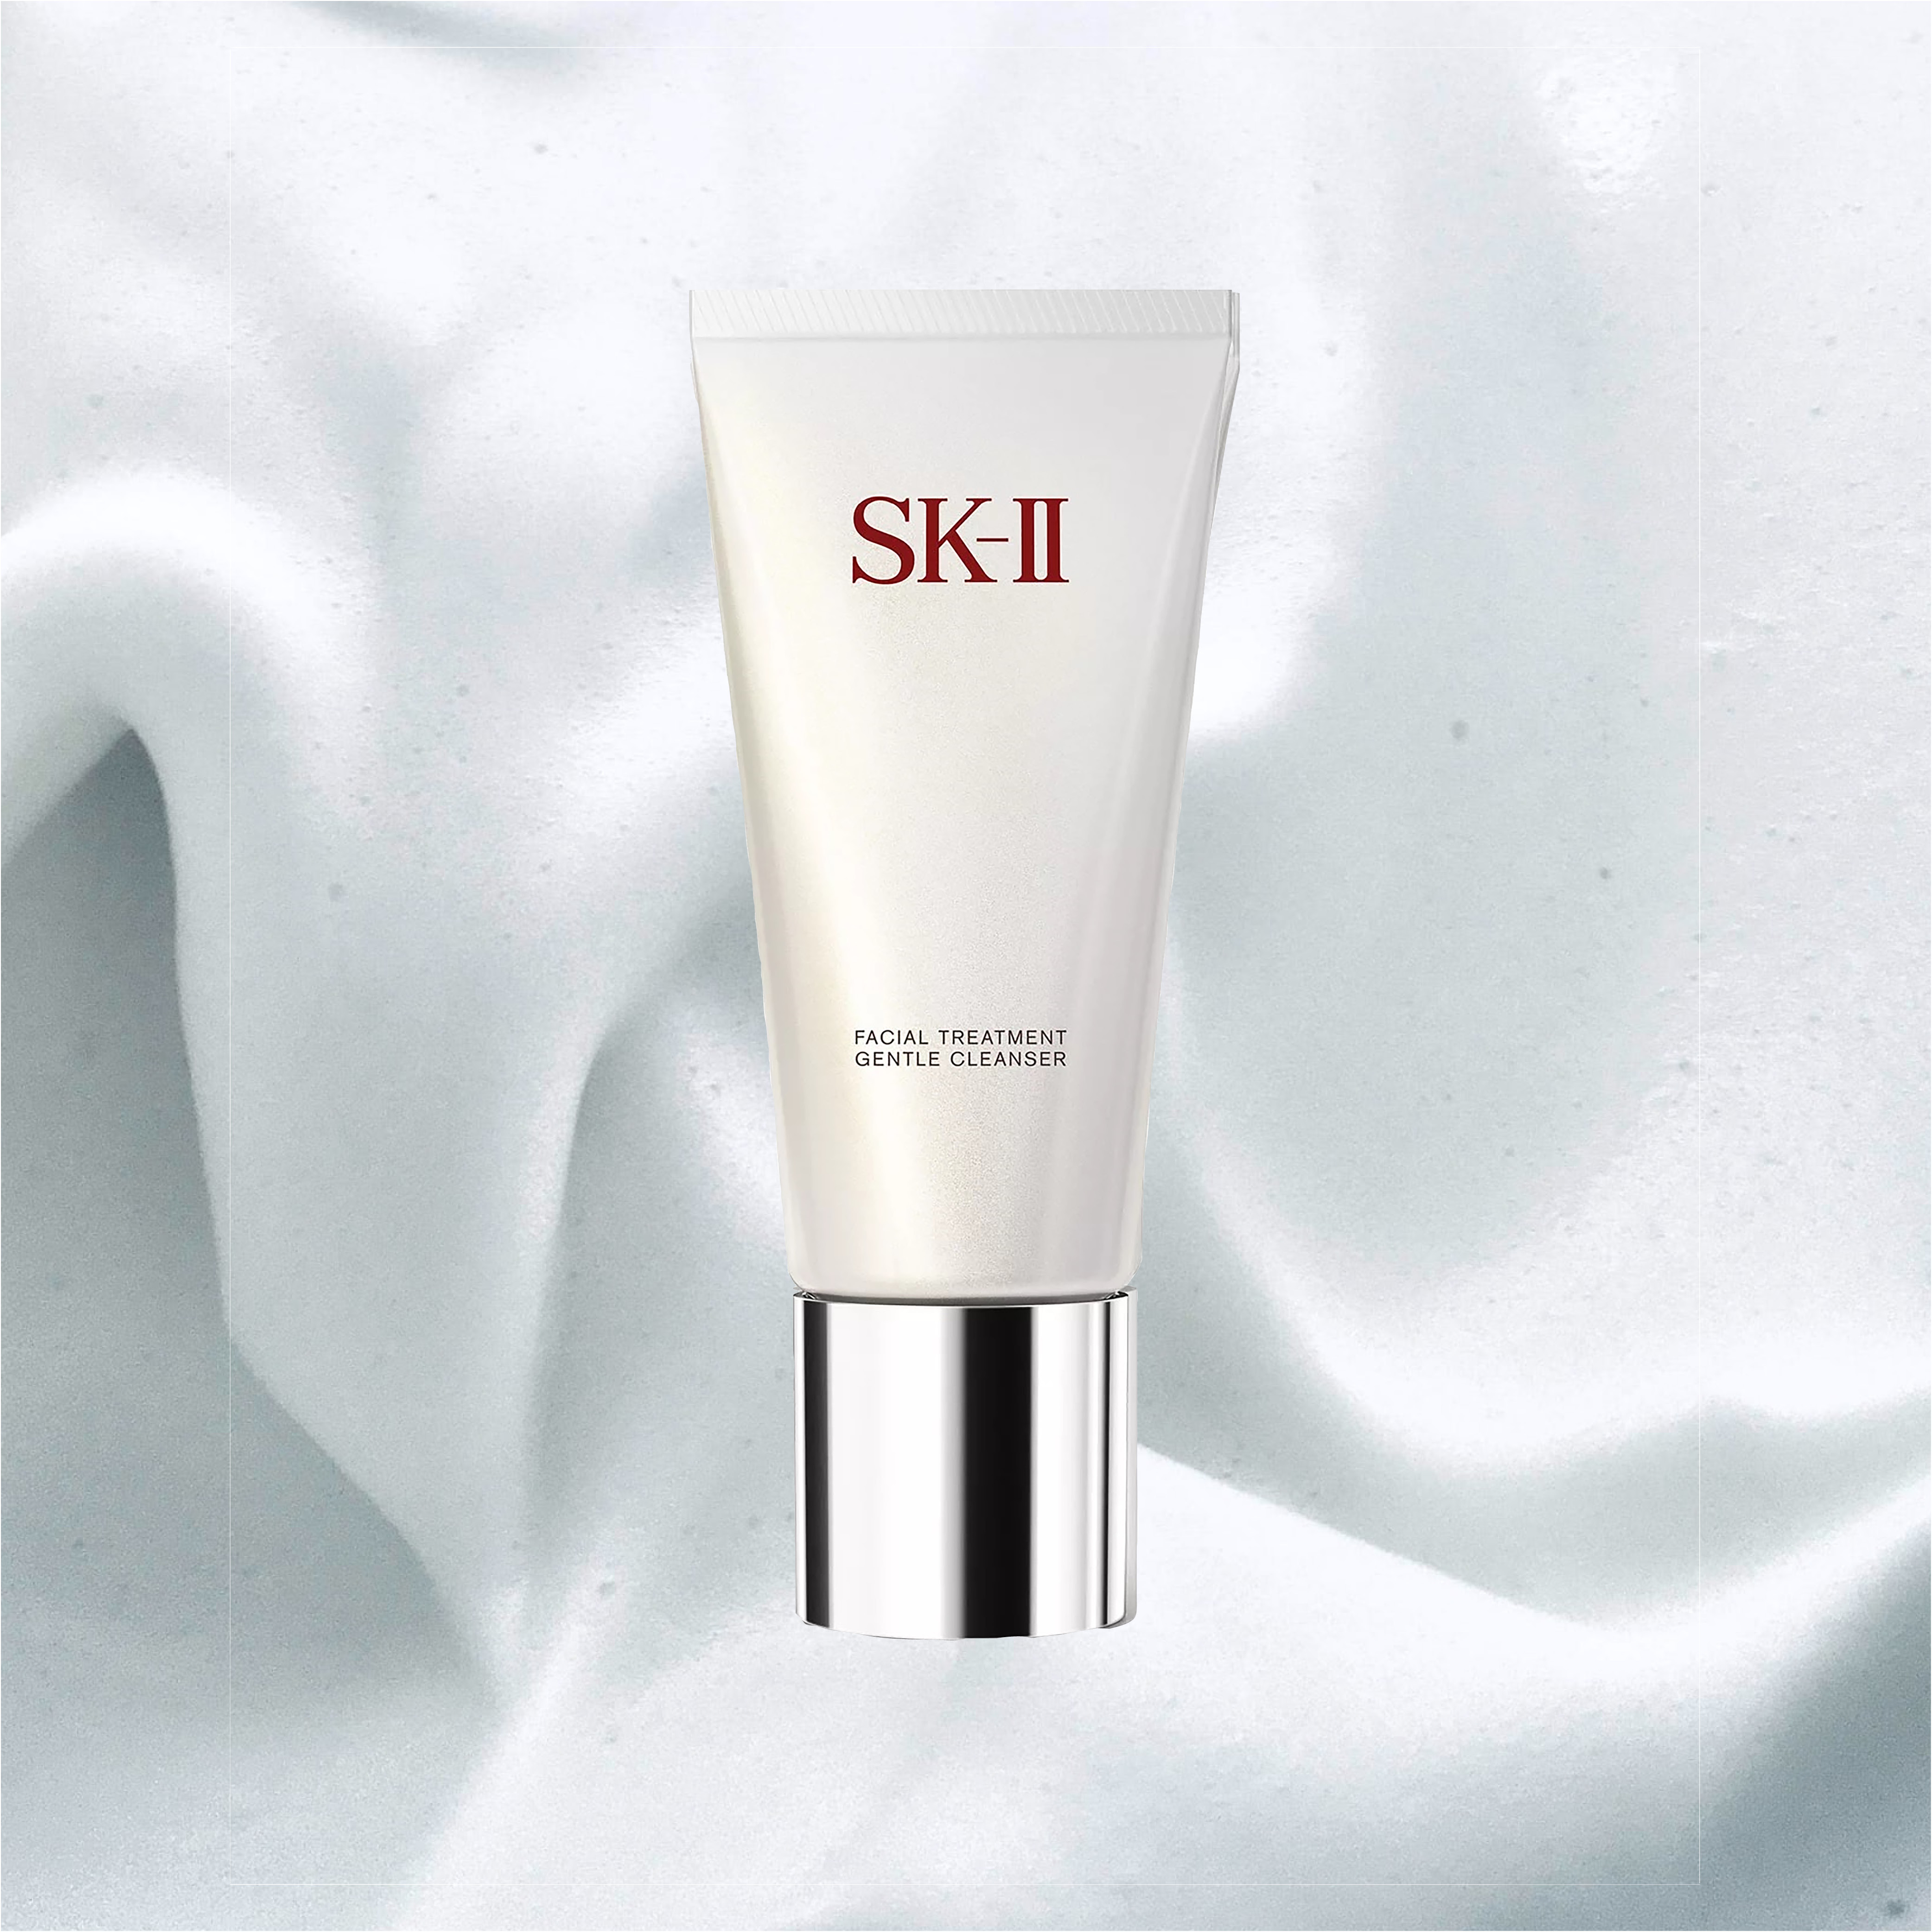 Self-care 101: The skincare routine you need for that post-lockdown glow up with SK-II